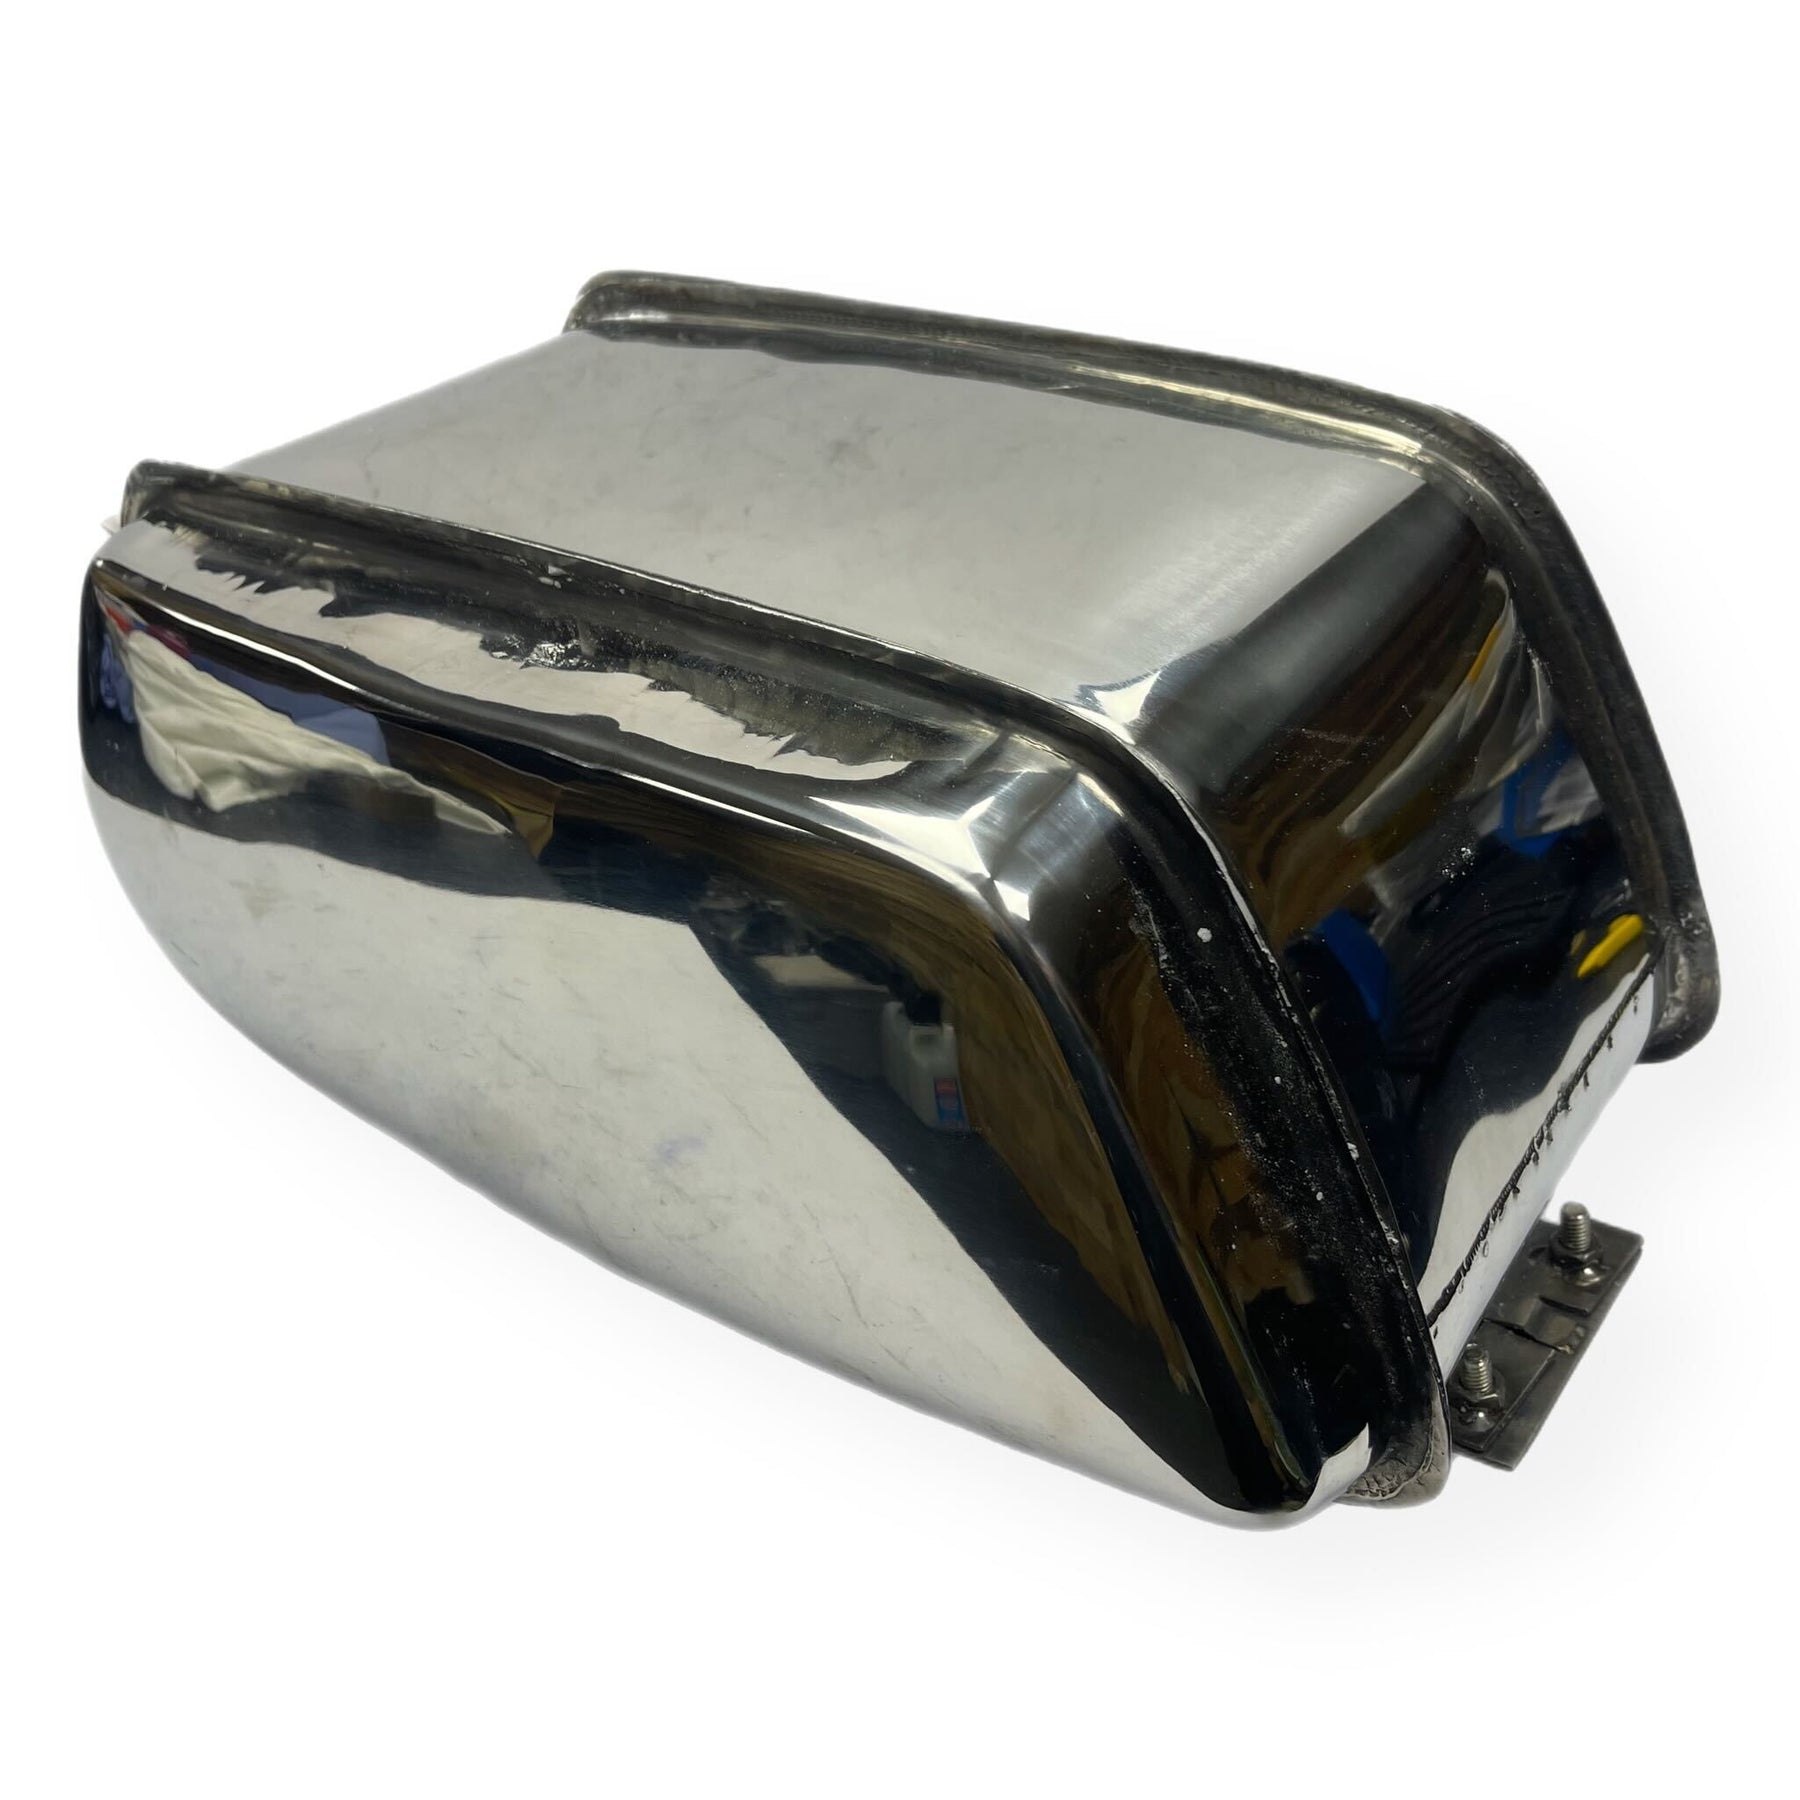 Lambretta Long Range 17 litre petrol tank with built-in toolbox - Polished Stainless Steel